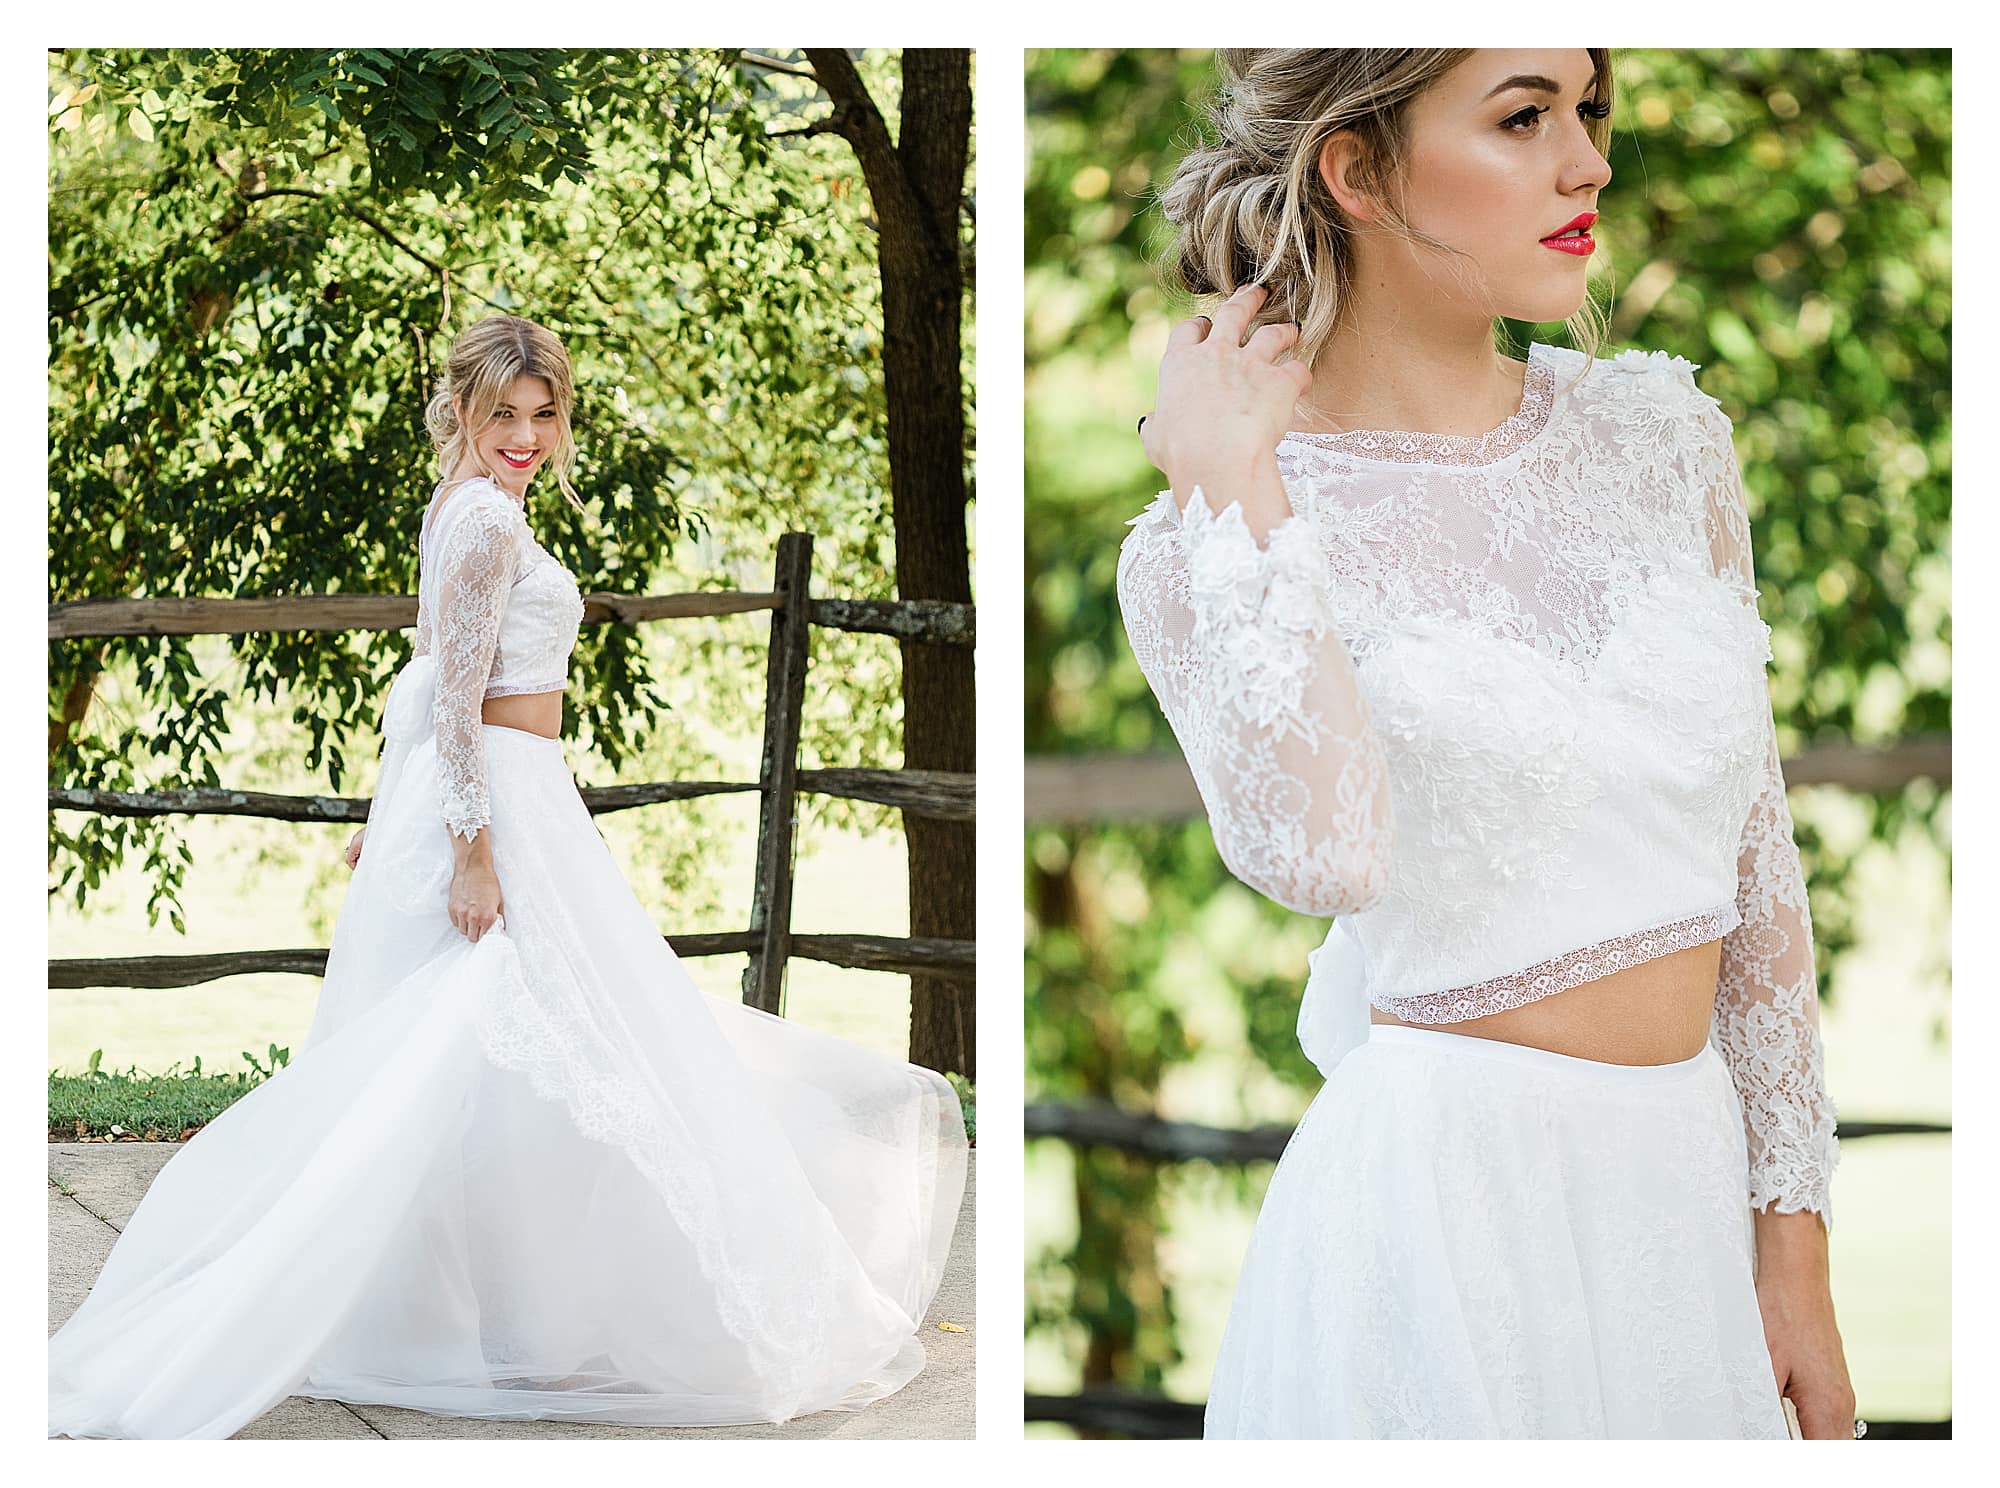 Bride wearing two piece white lace wedding dress smiling outside under trees